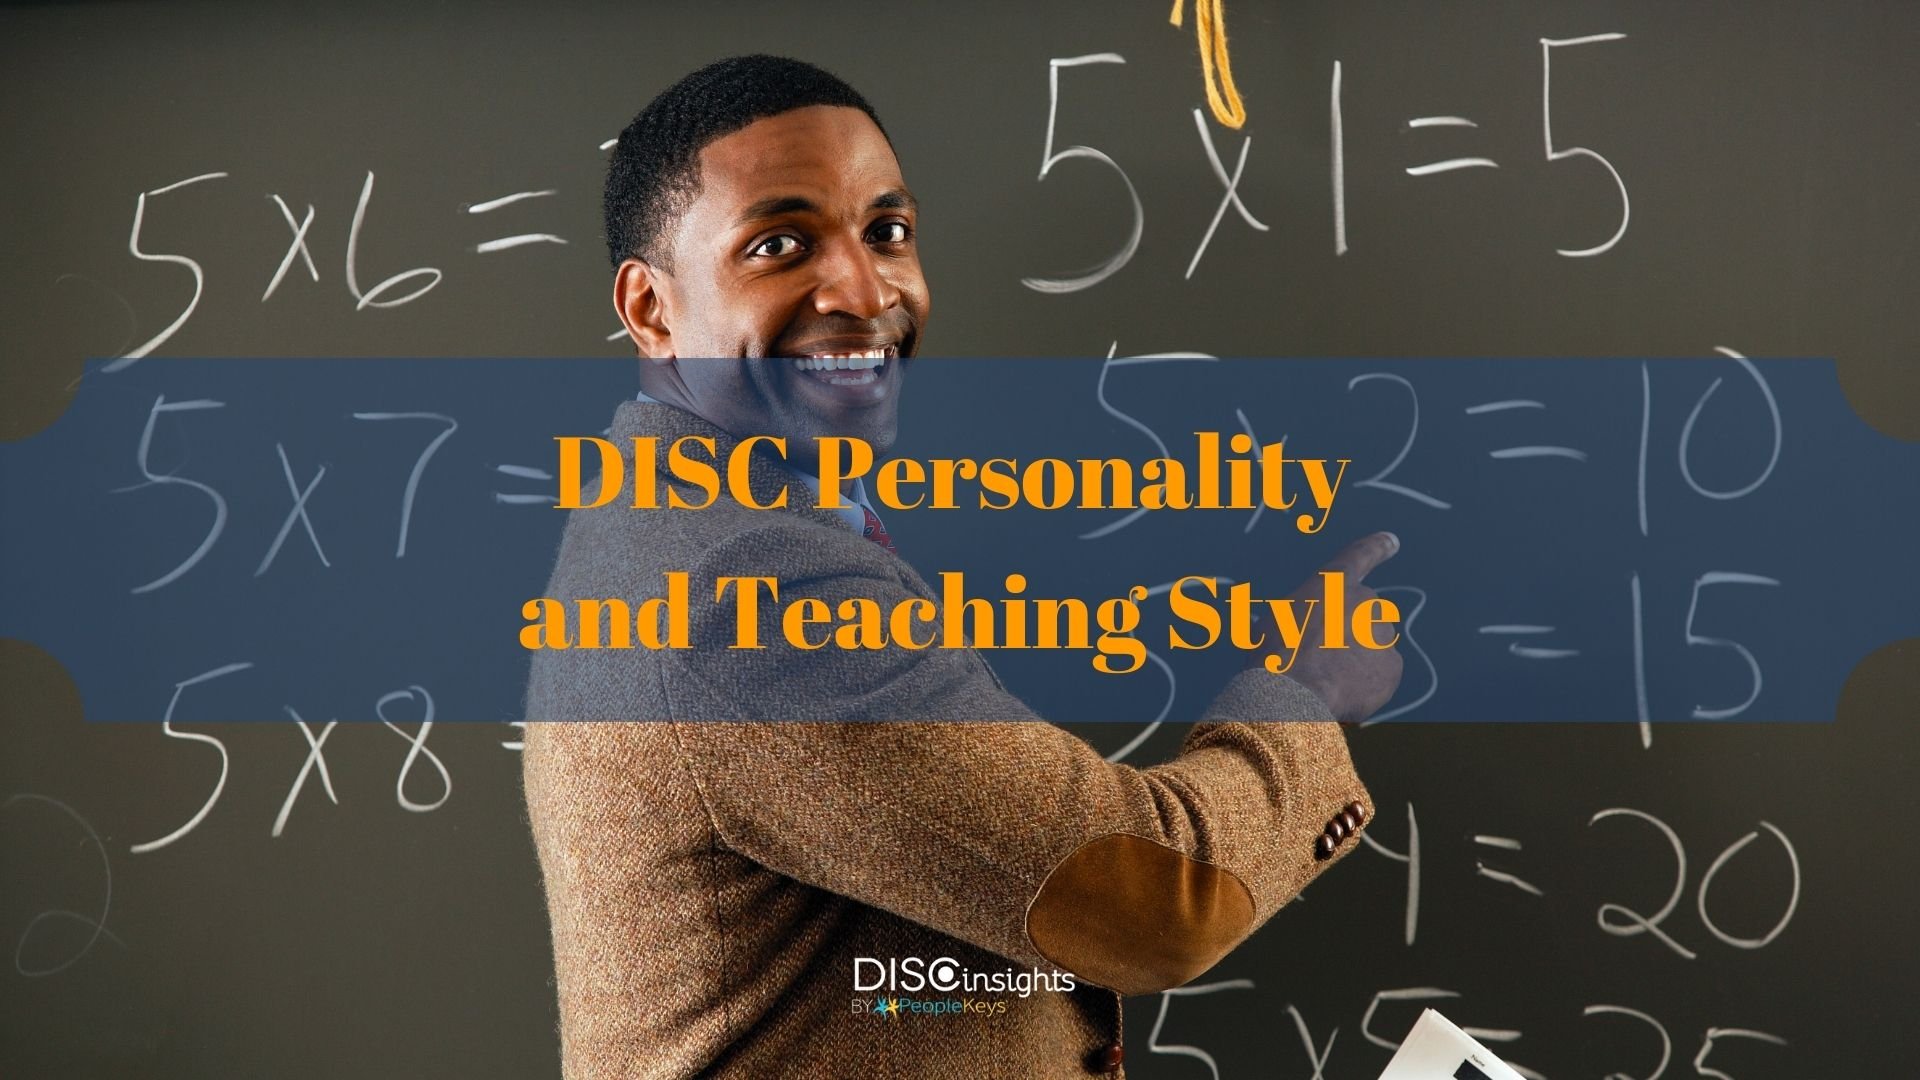 DISC personality and teaching style